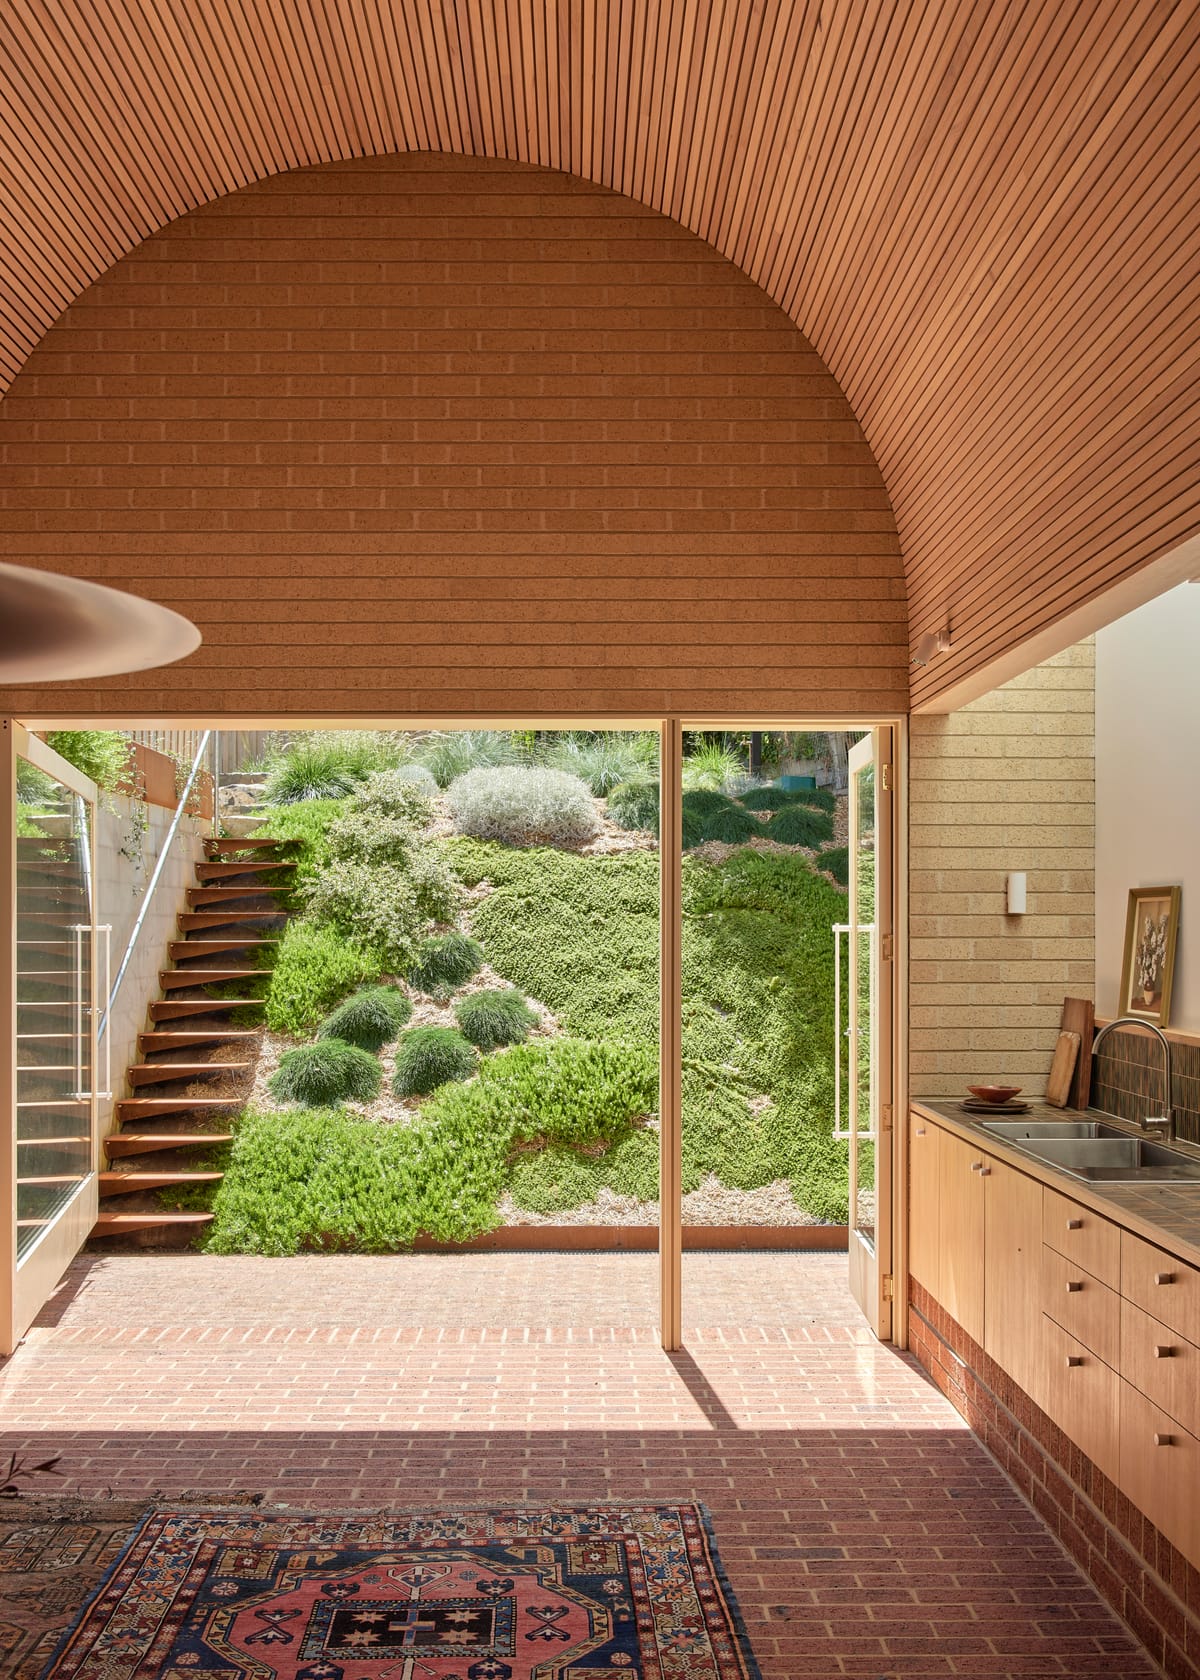 Harriet's House by SO:Architecture. Photography by Sean Fennessy. Kitchen overlooking garden. Brick floors. 